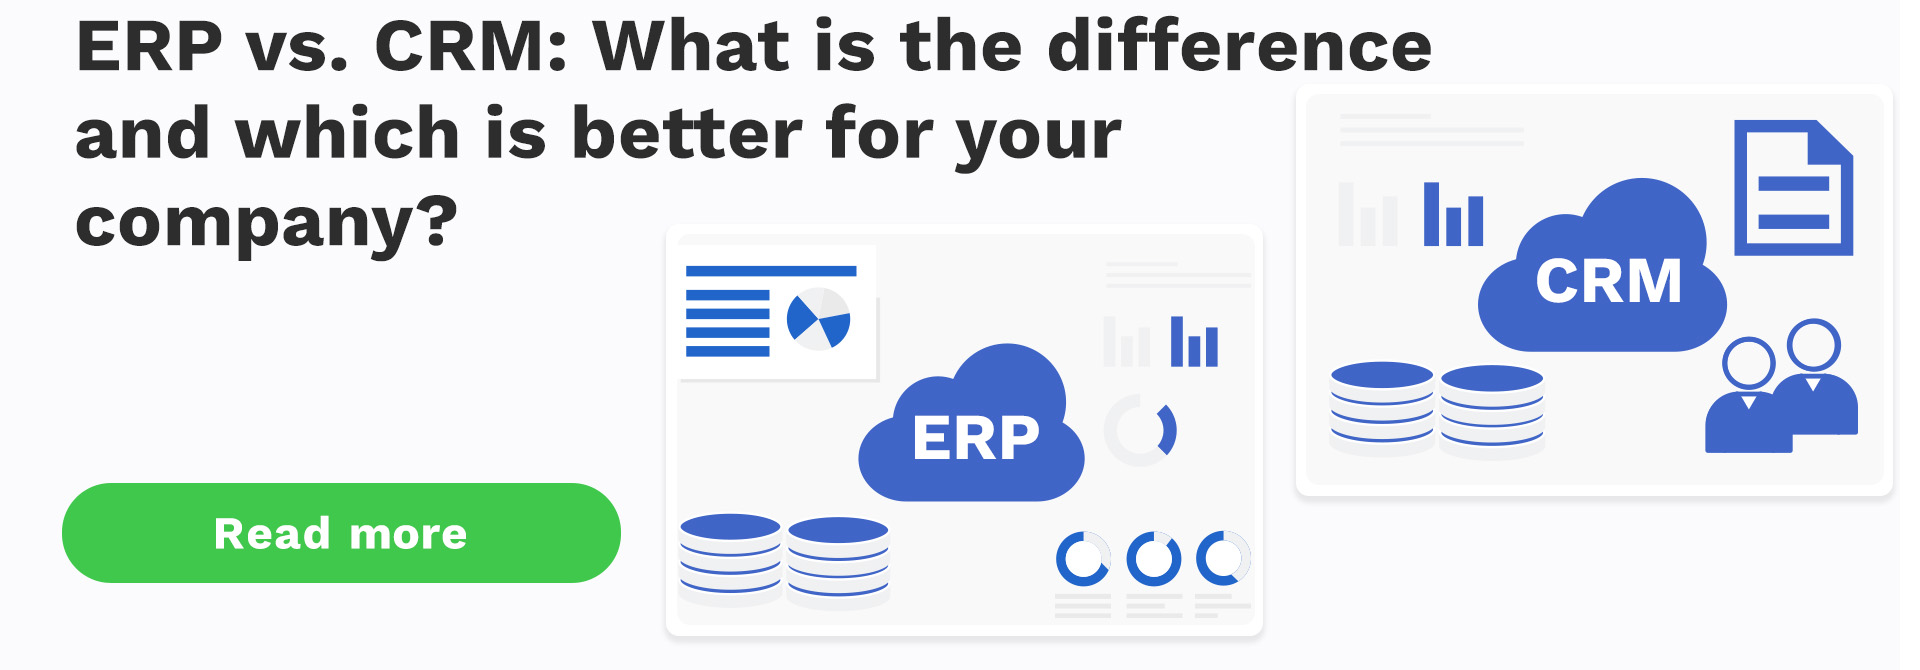 ERP vs. CRM_What is the difference and which is better for your company